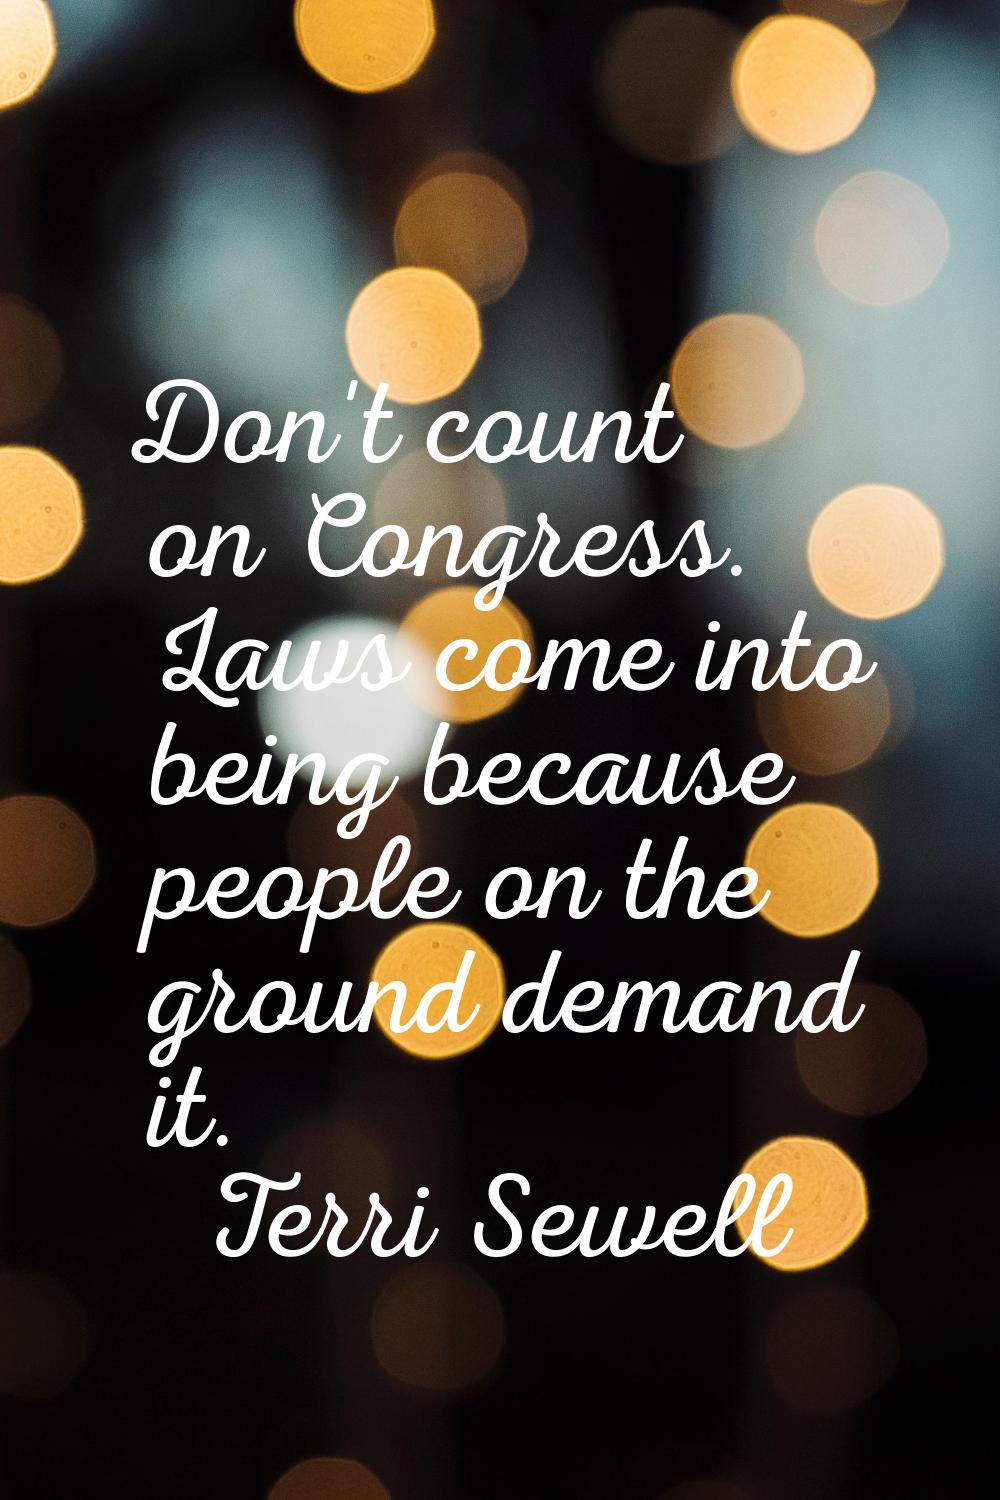 Don't count on Congress. Laws come into being because people on the ground demand it.